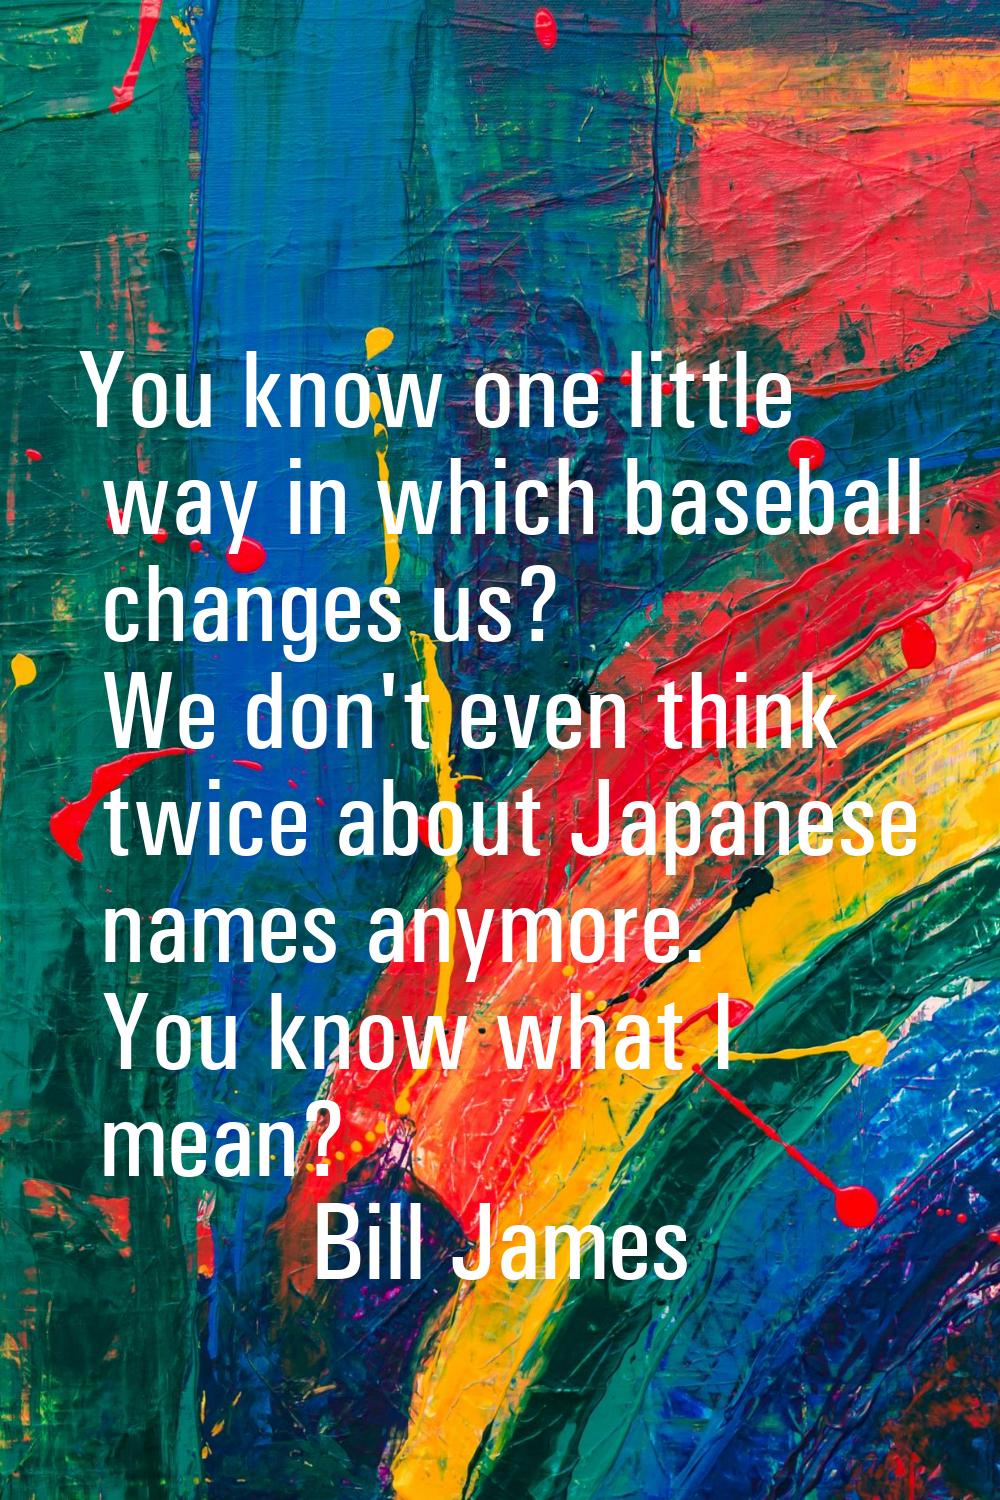 You know one little way in which baseball changes us? We don't even think twice about Japanese name